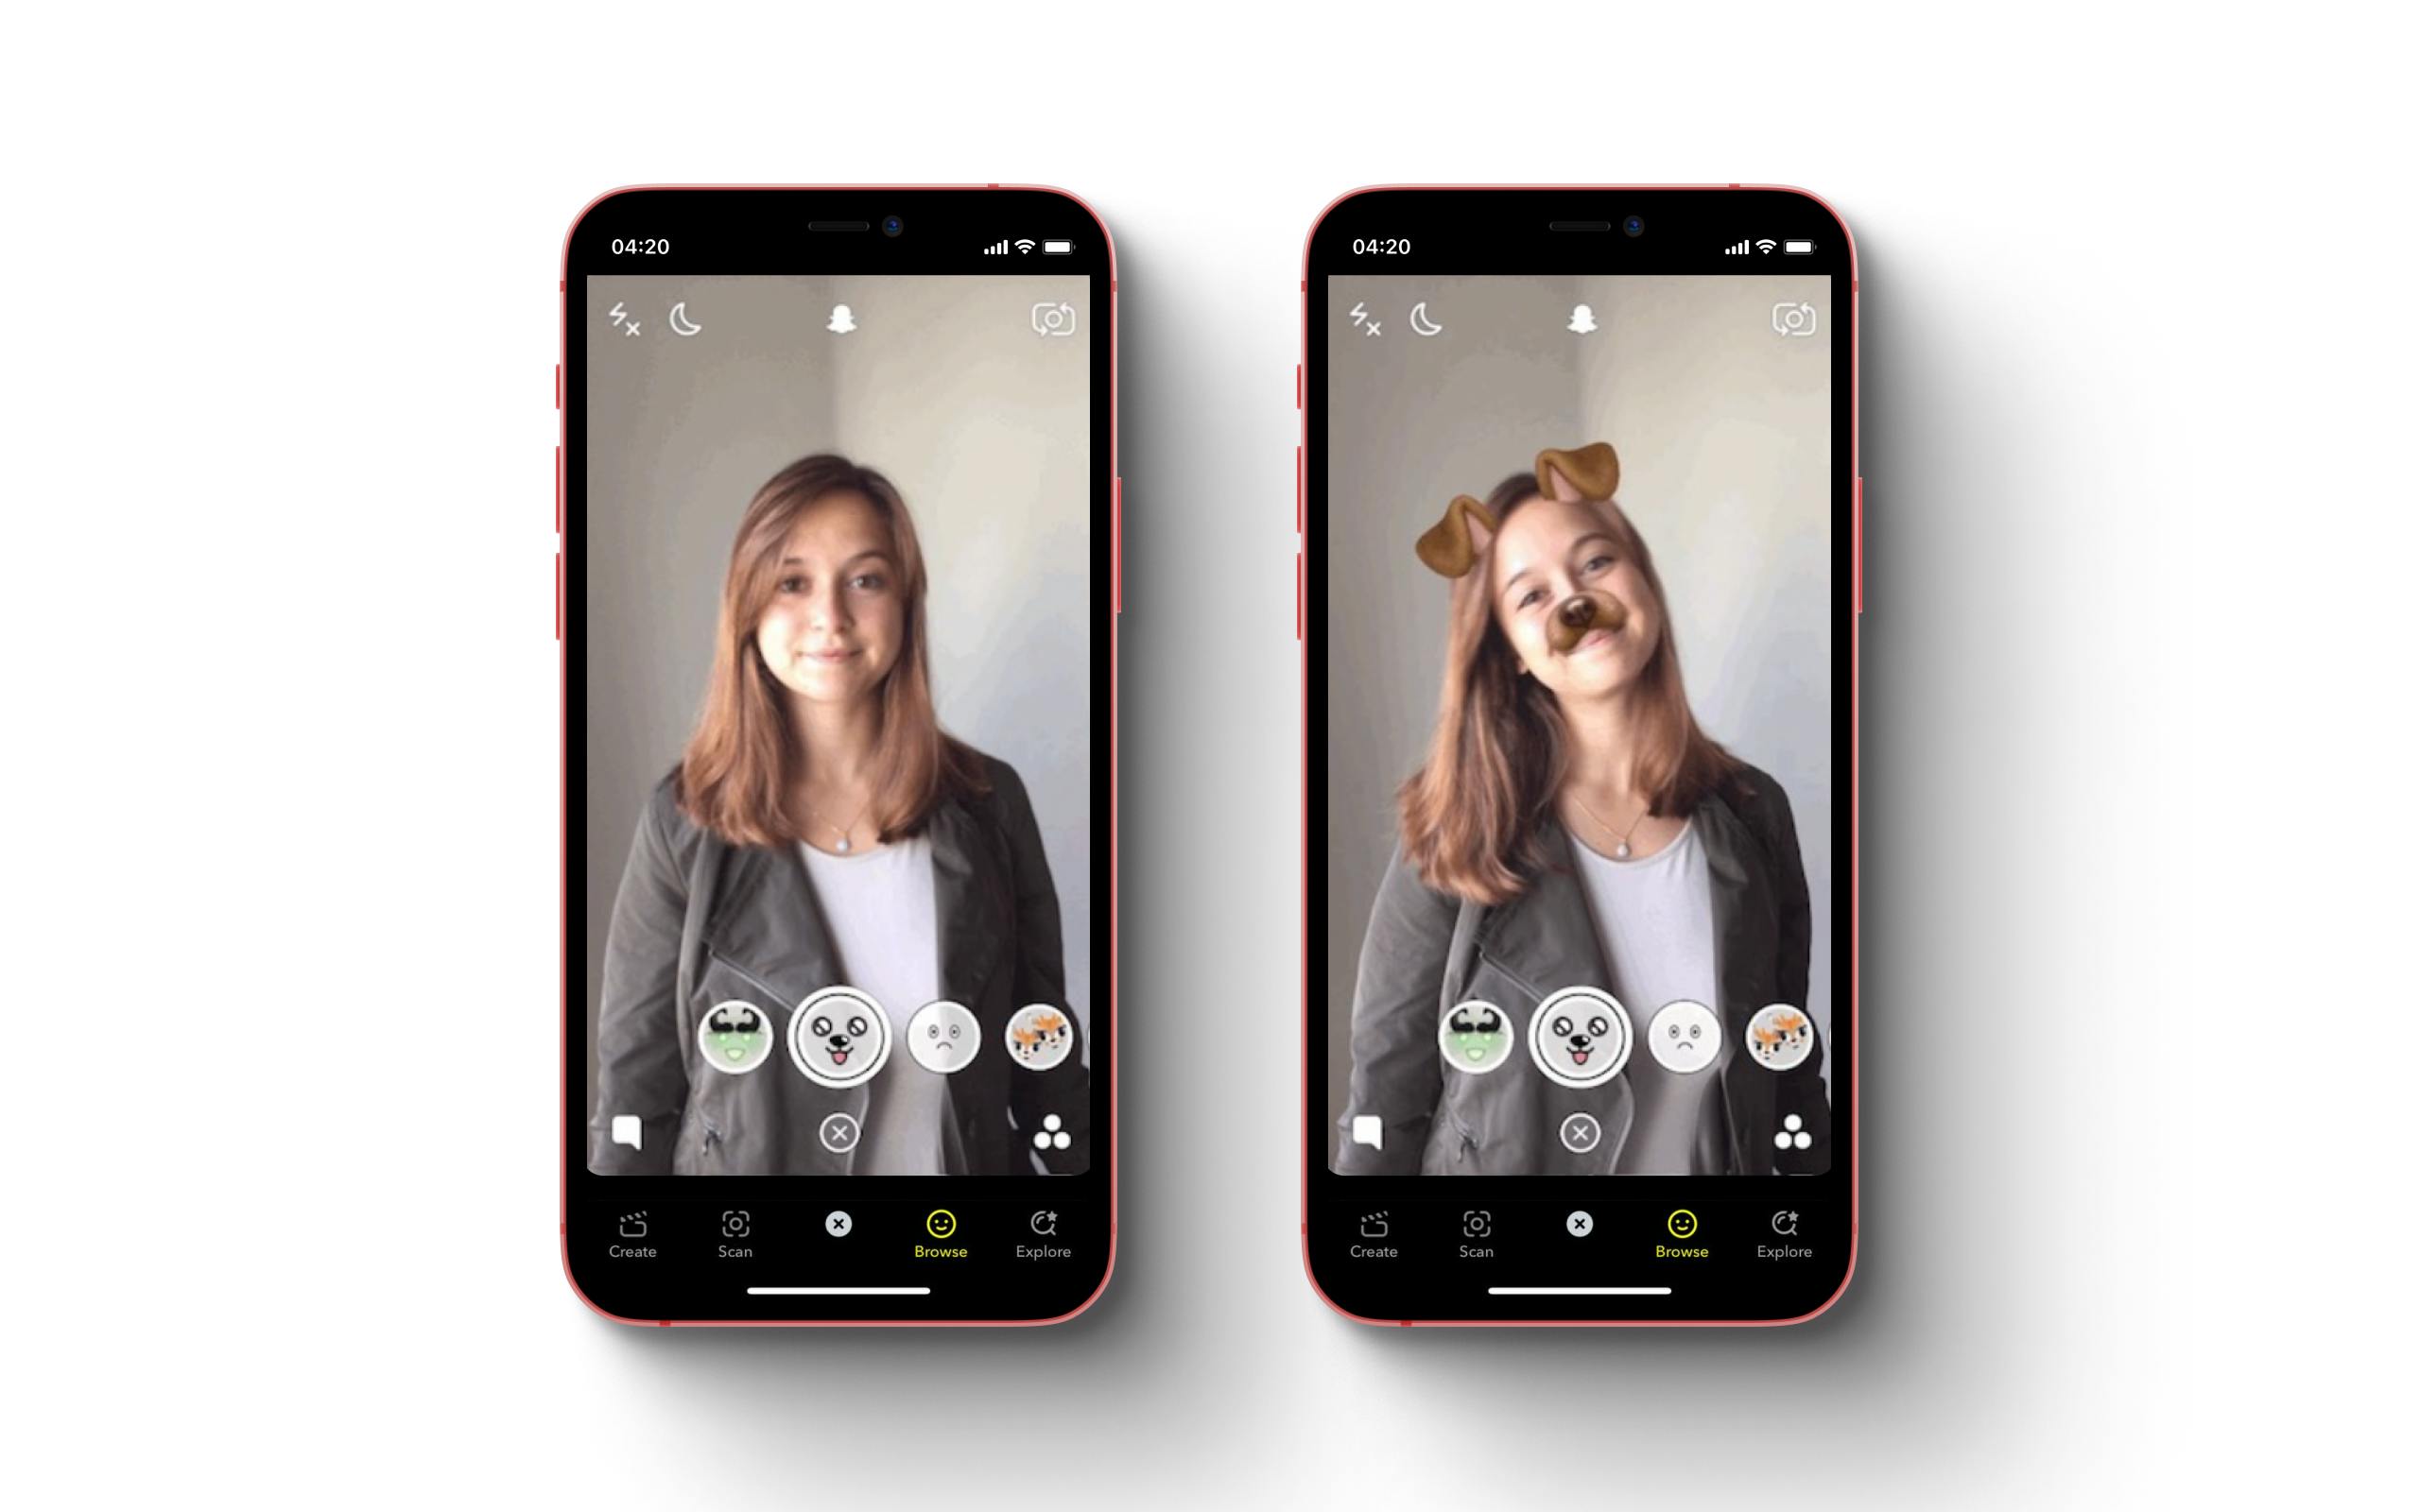 Get inspired by Snapchat to build an app like Instagram